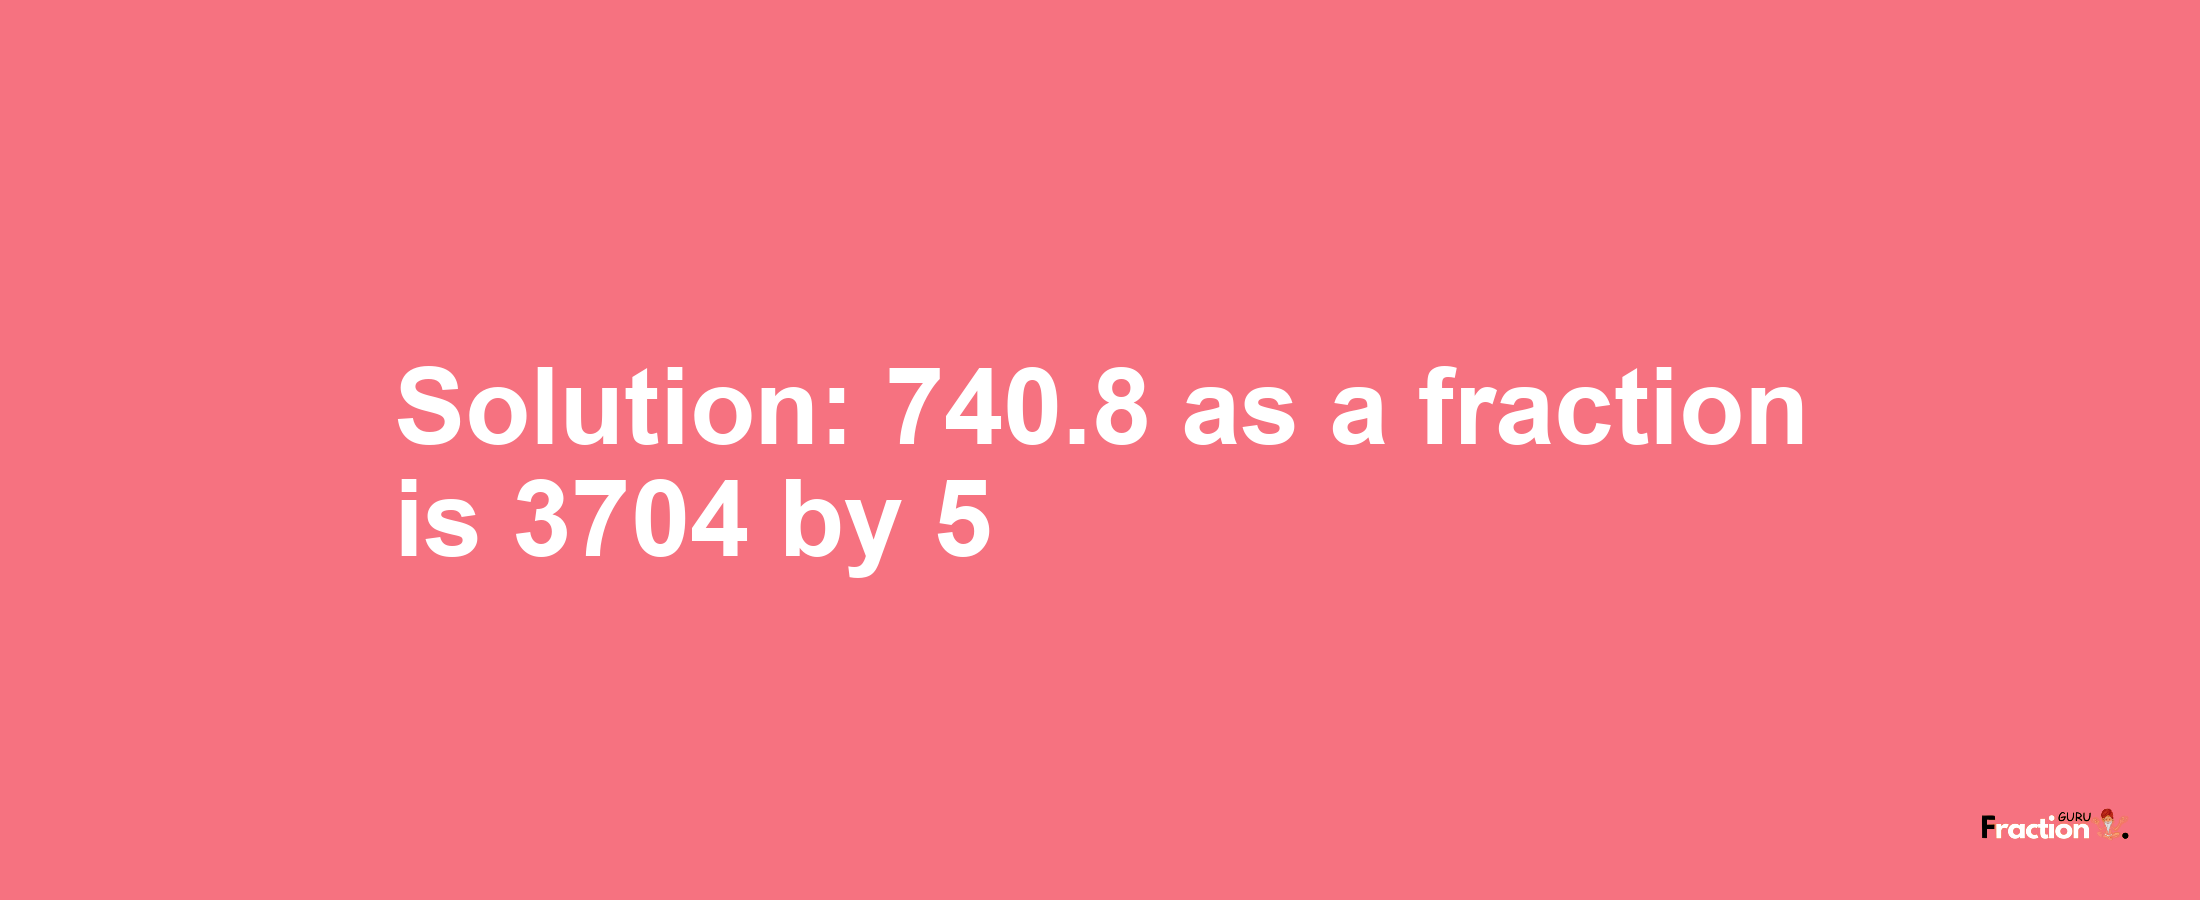 Solution:740.8 as a fraction is 3704/5